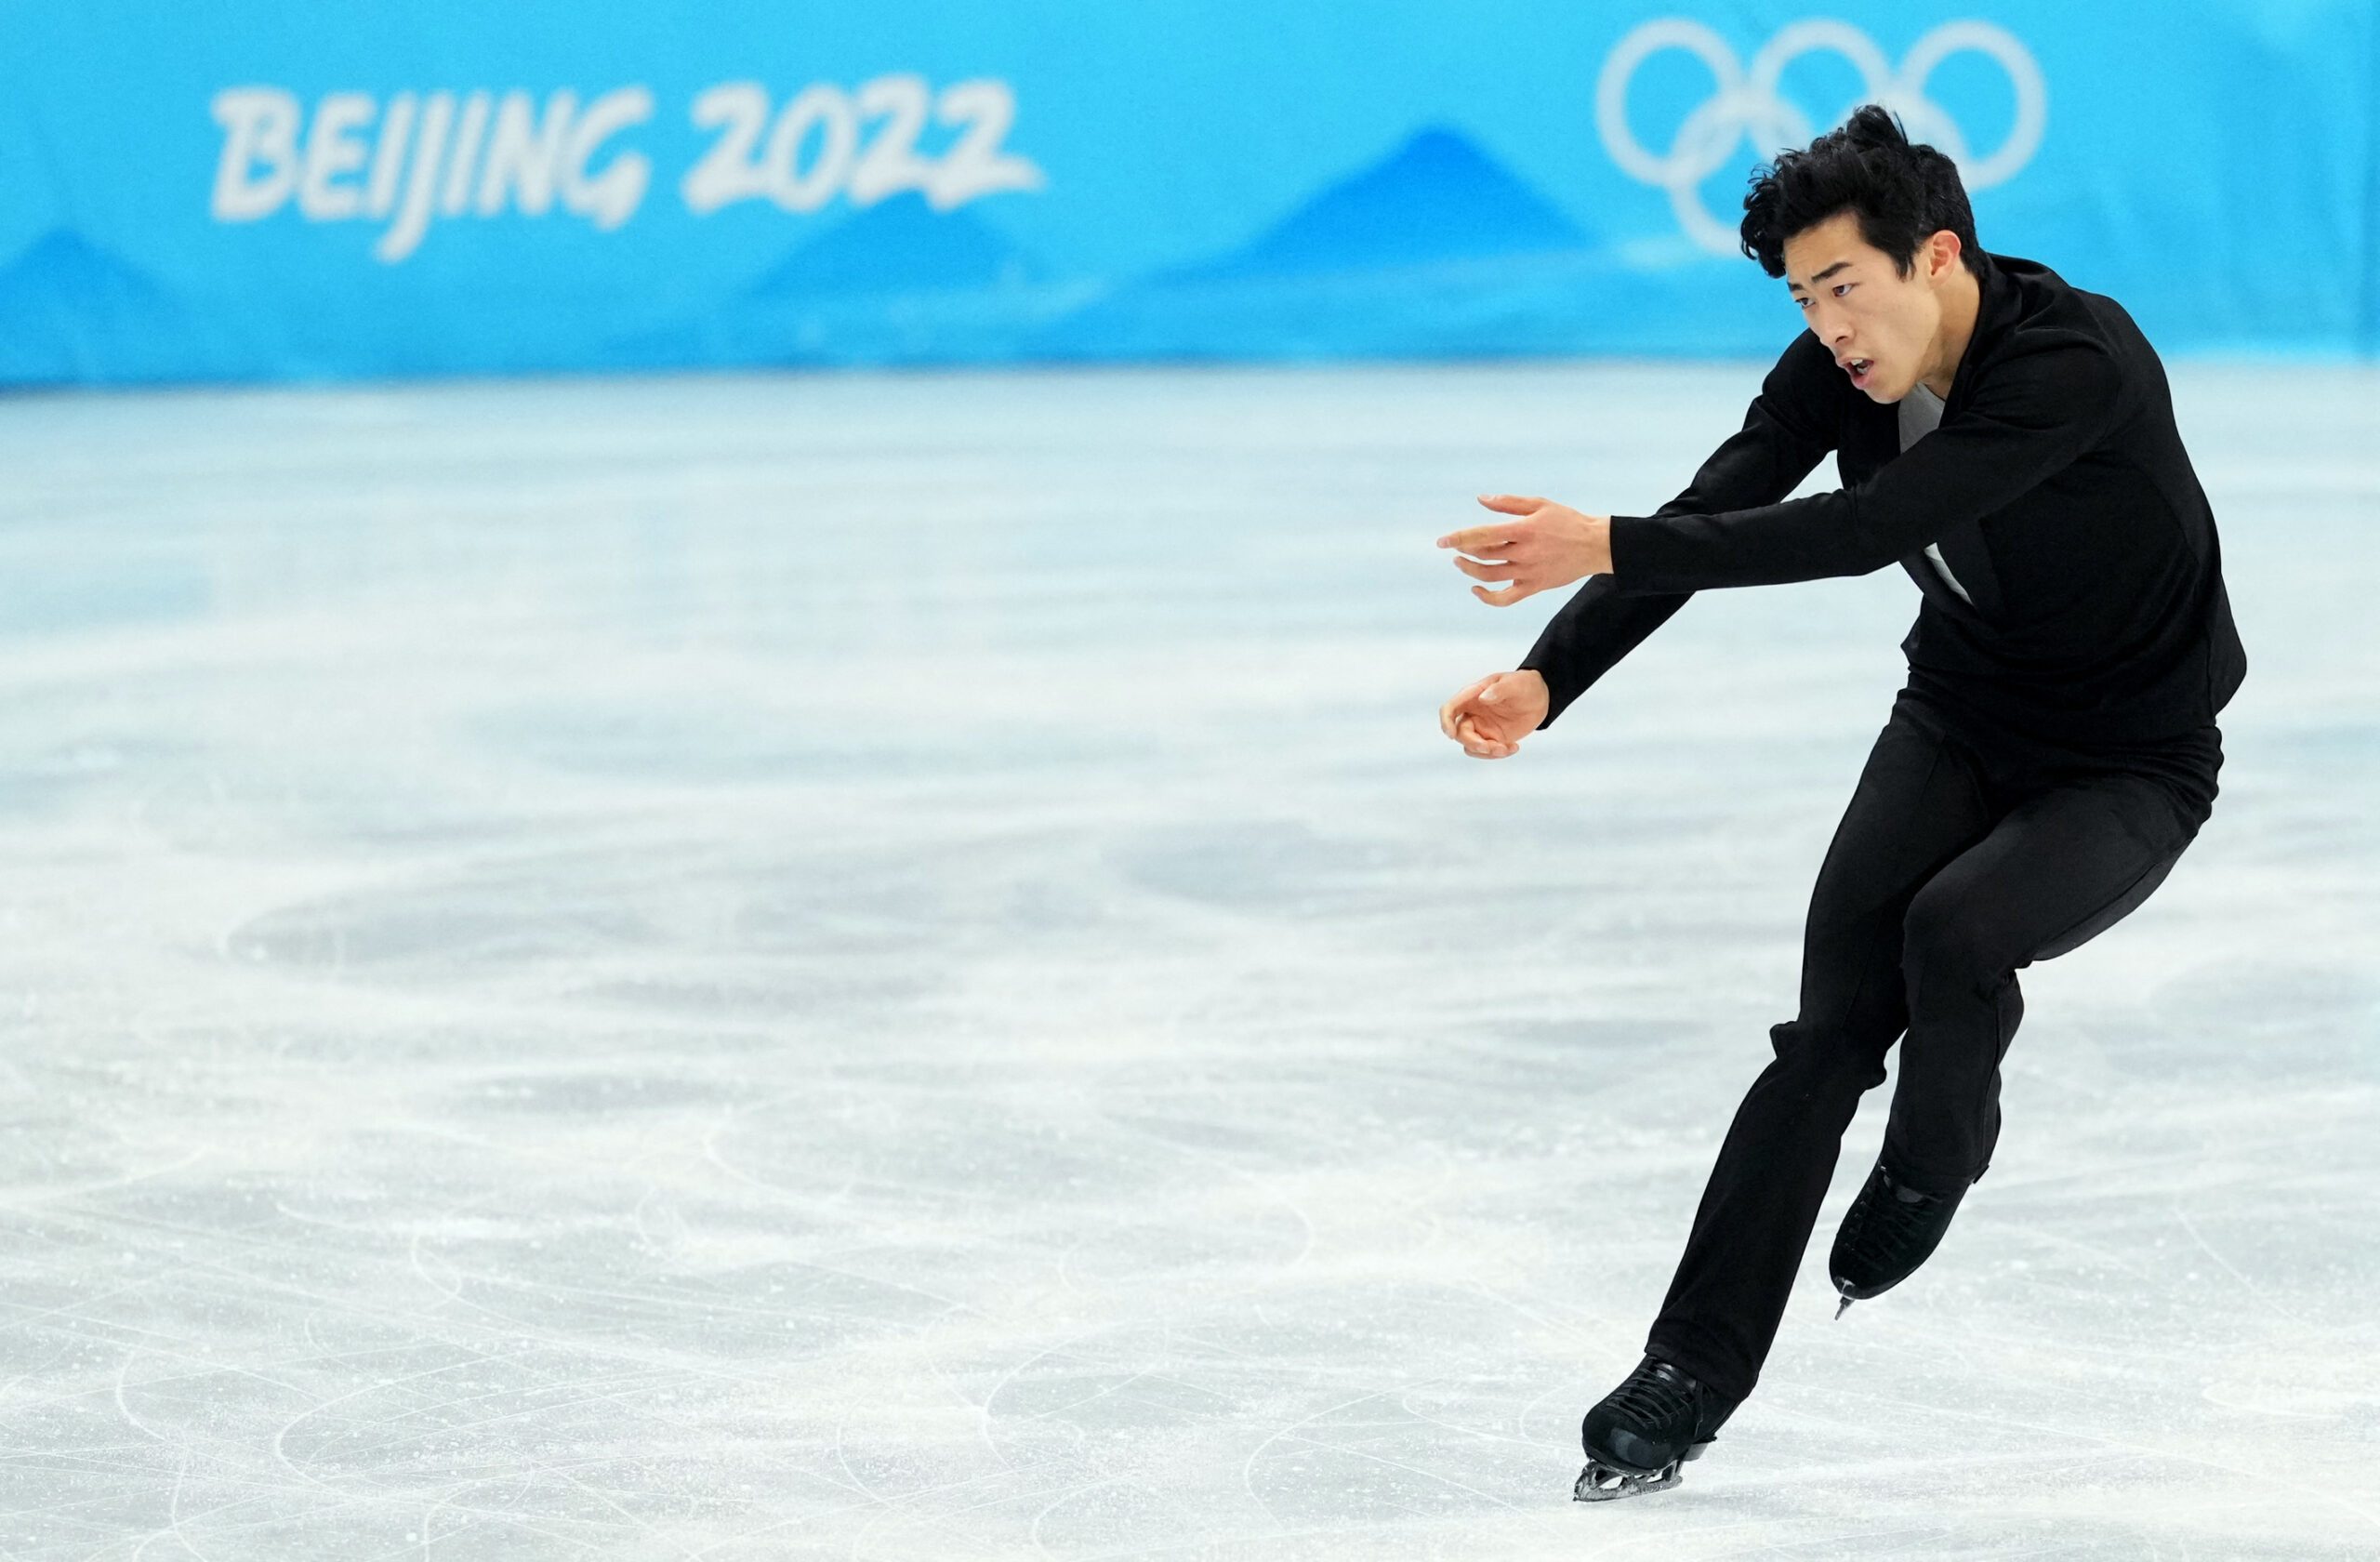 Nathan Chen earns redemption with world record in Winter Games